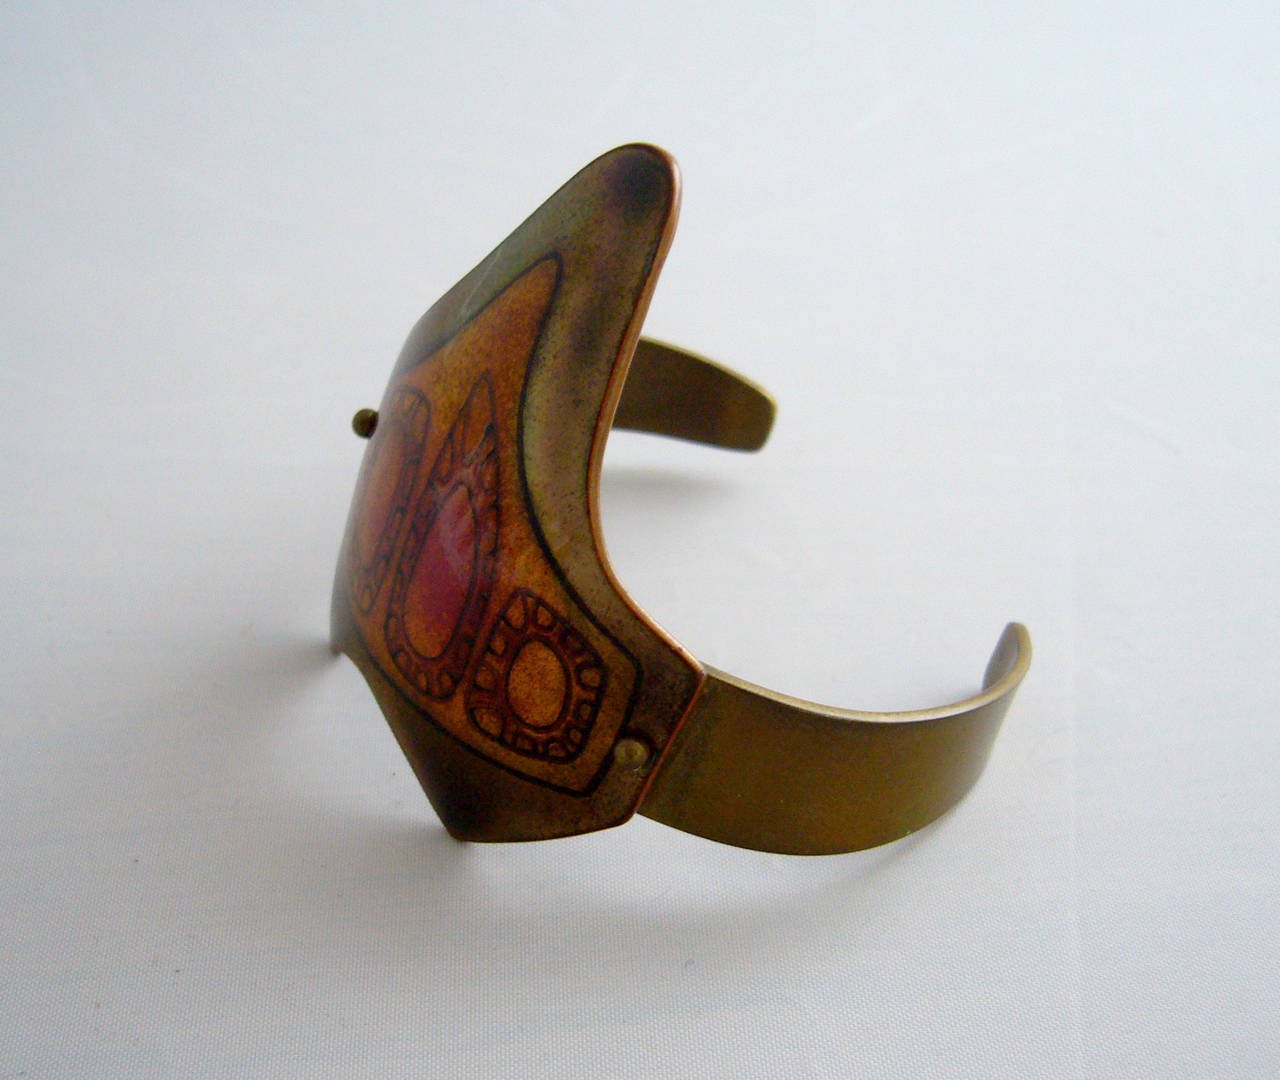 An enamel cuff bracelet with abstract design, created by Jack Boyd of San Diego.  Bracelet has about 7.25